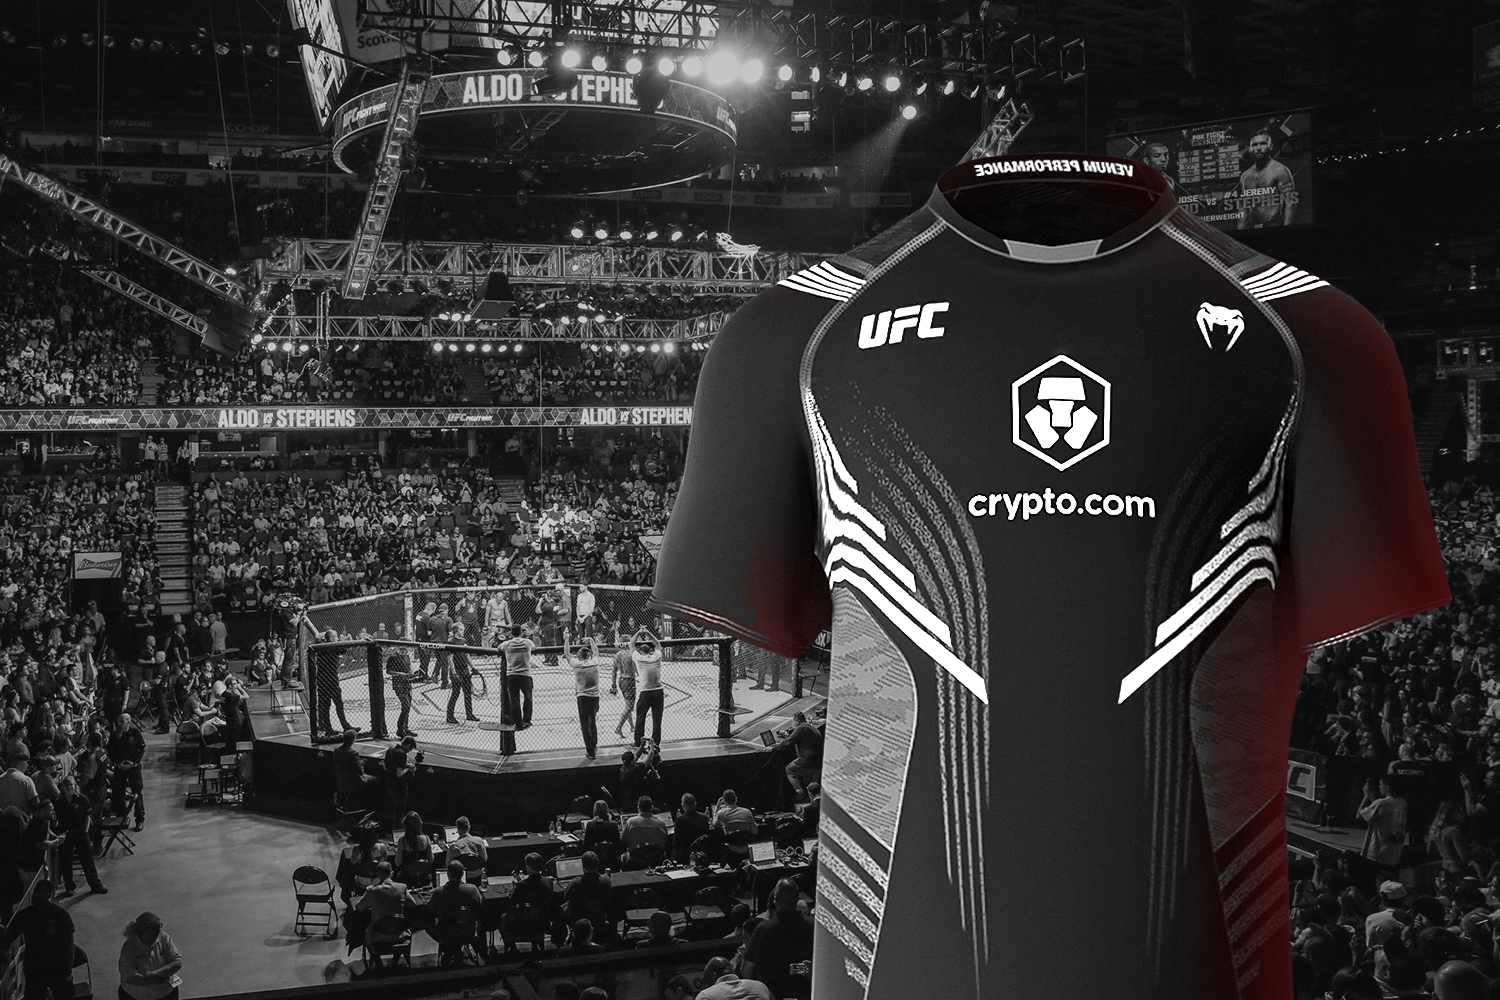 Ufc cryptocurrency cryptocurrency withdrawal ??